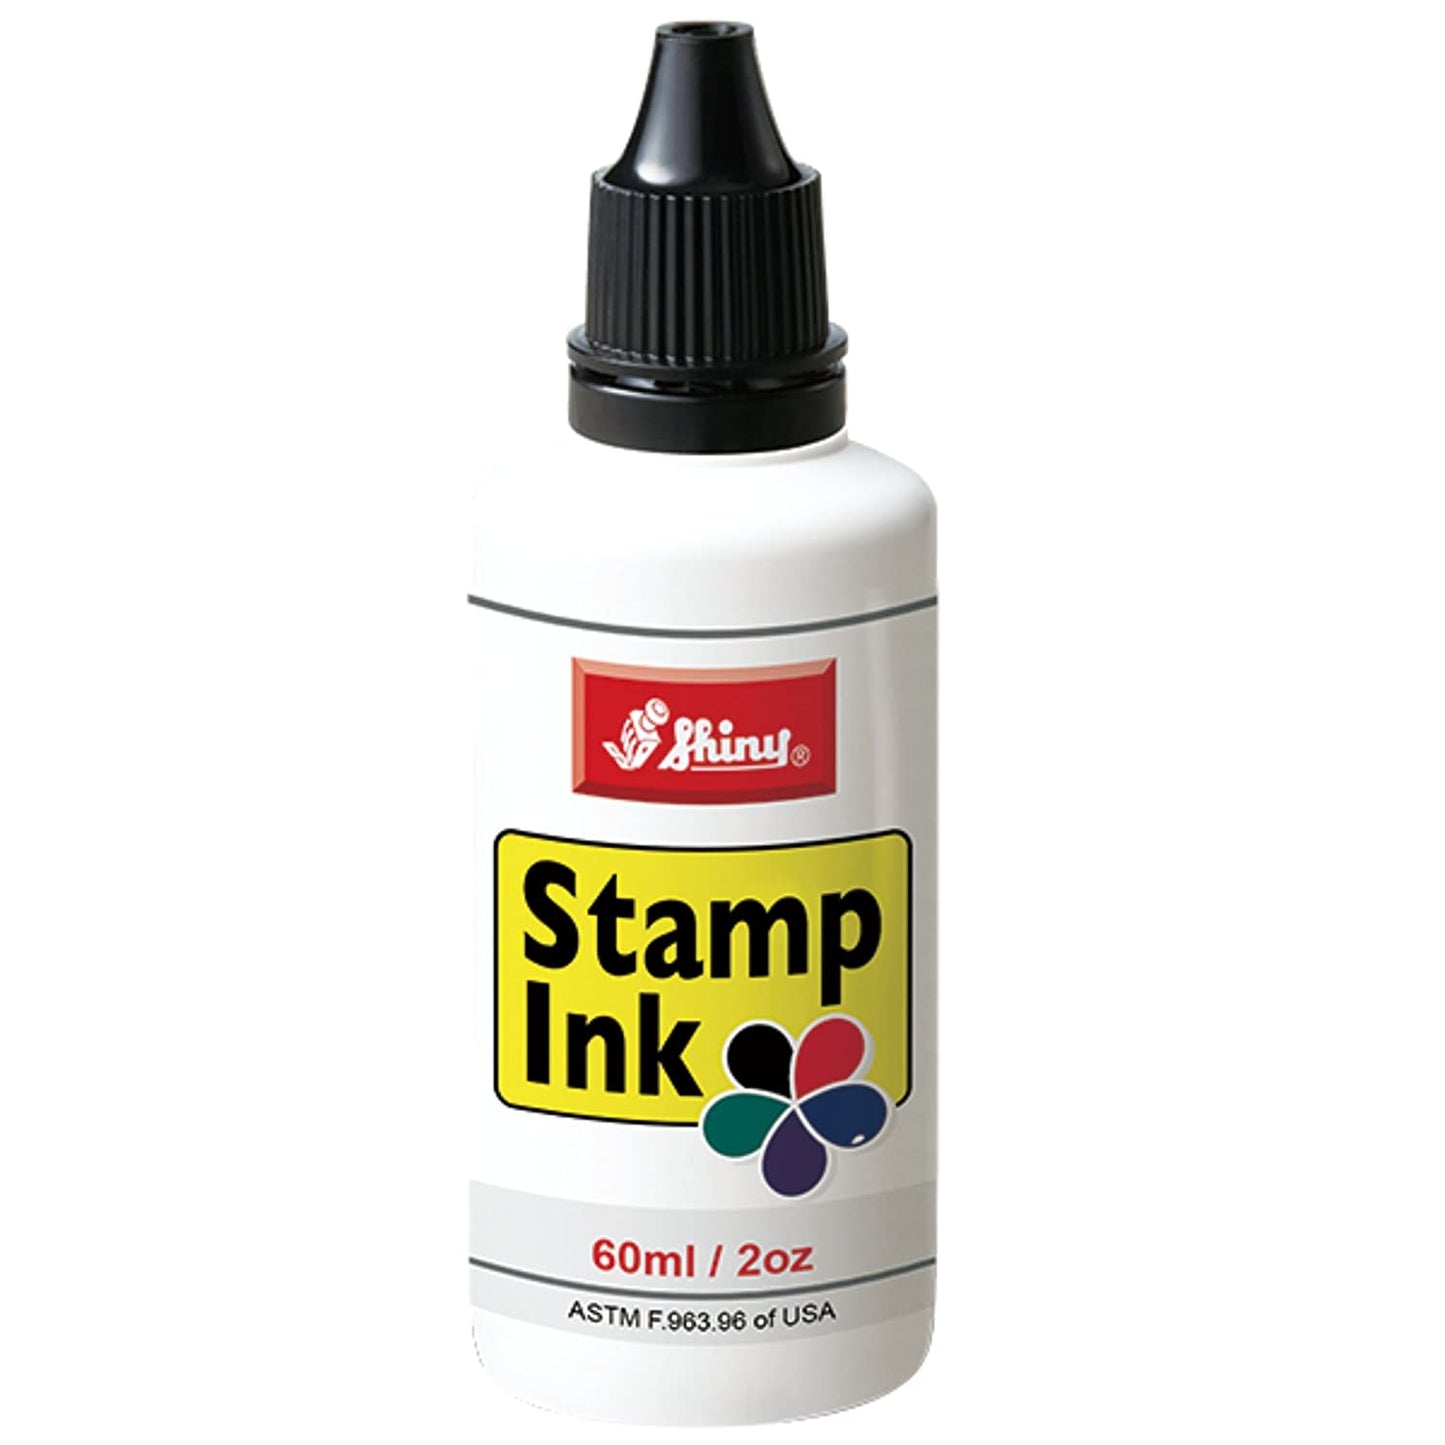 Refill Ink For All Notary VA Stamps & Embossers